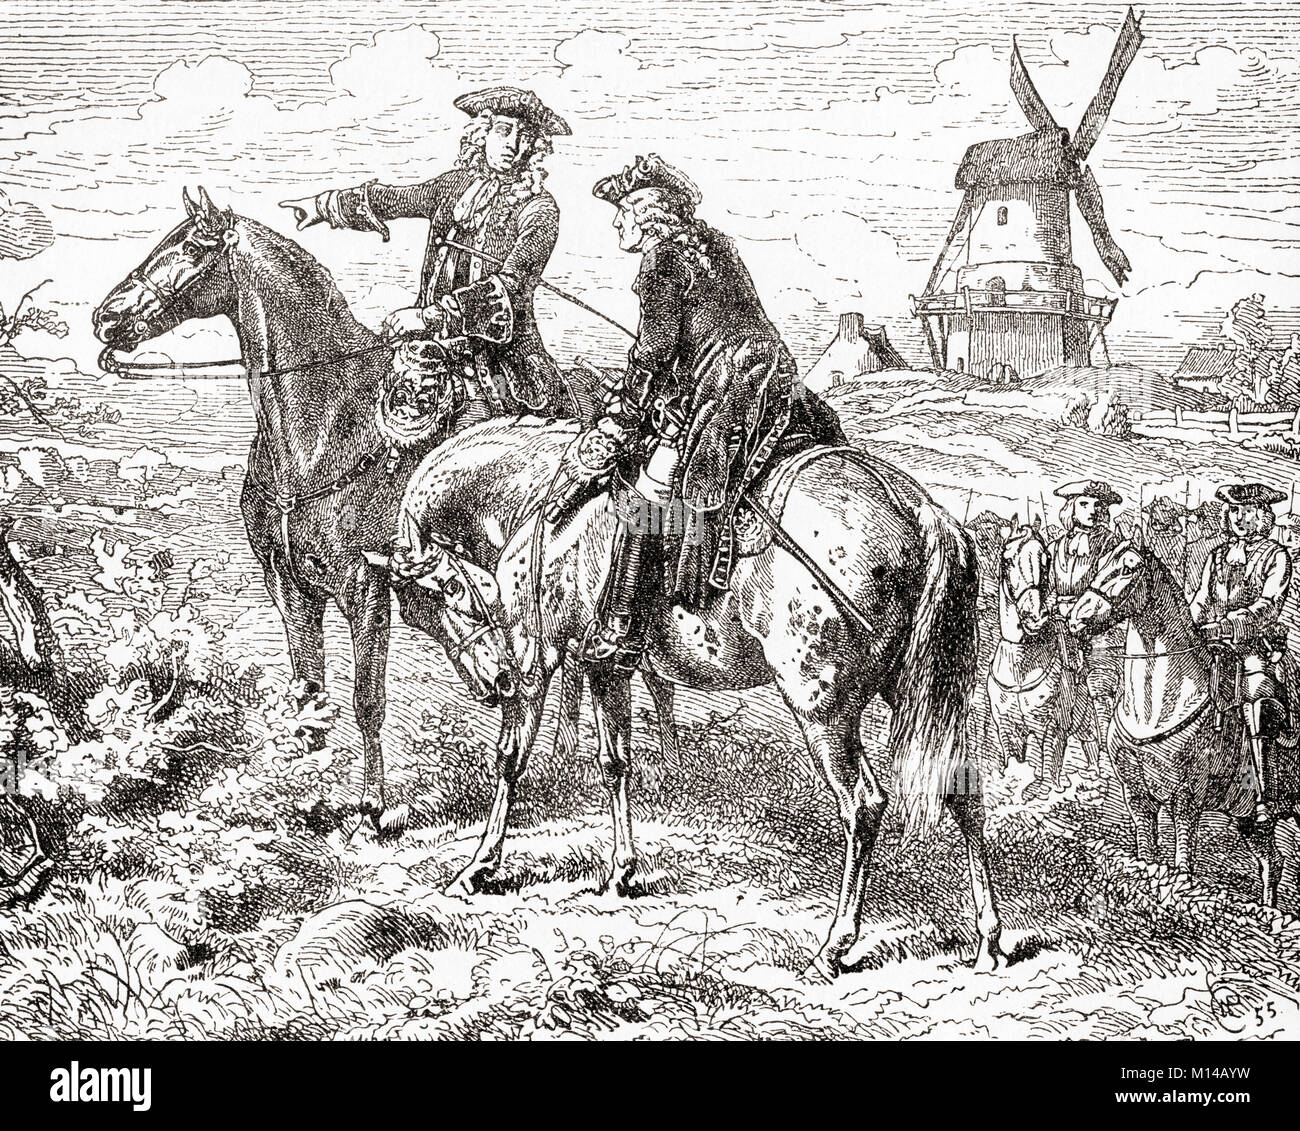 The Duke of Marlborough at The Battle of Malplaquet,11 September 1709.  General John Churchill, 1st Duke of Marlborough, 1st Prince of Mindelheim, 1st Count of Nellenburg, Prince of the Holy Roman Empire, 1650 – 1722.  English soldier and statesman.  From Ward and Lock's Illustrated History of the World, published c.1882. Stock Photo